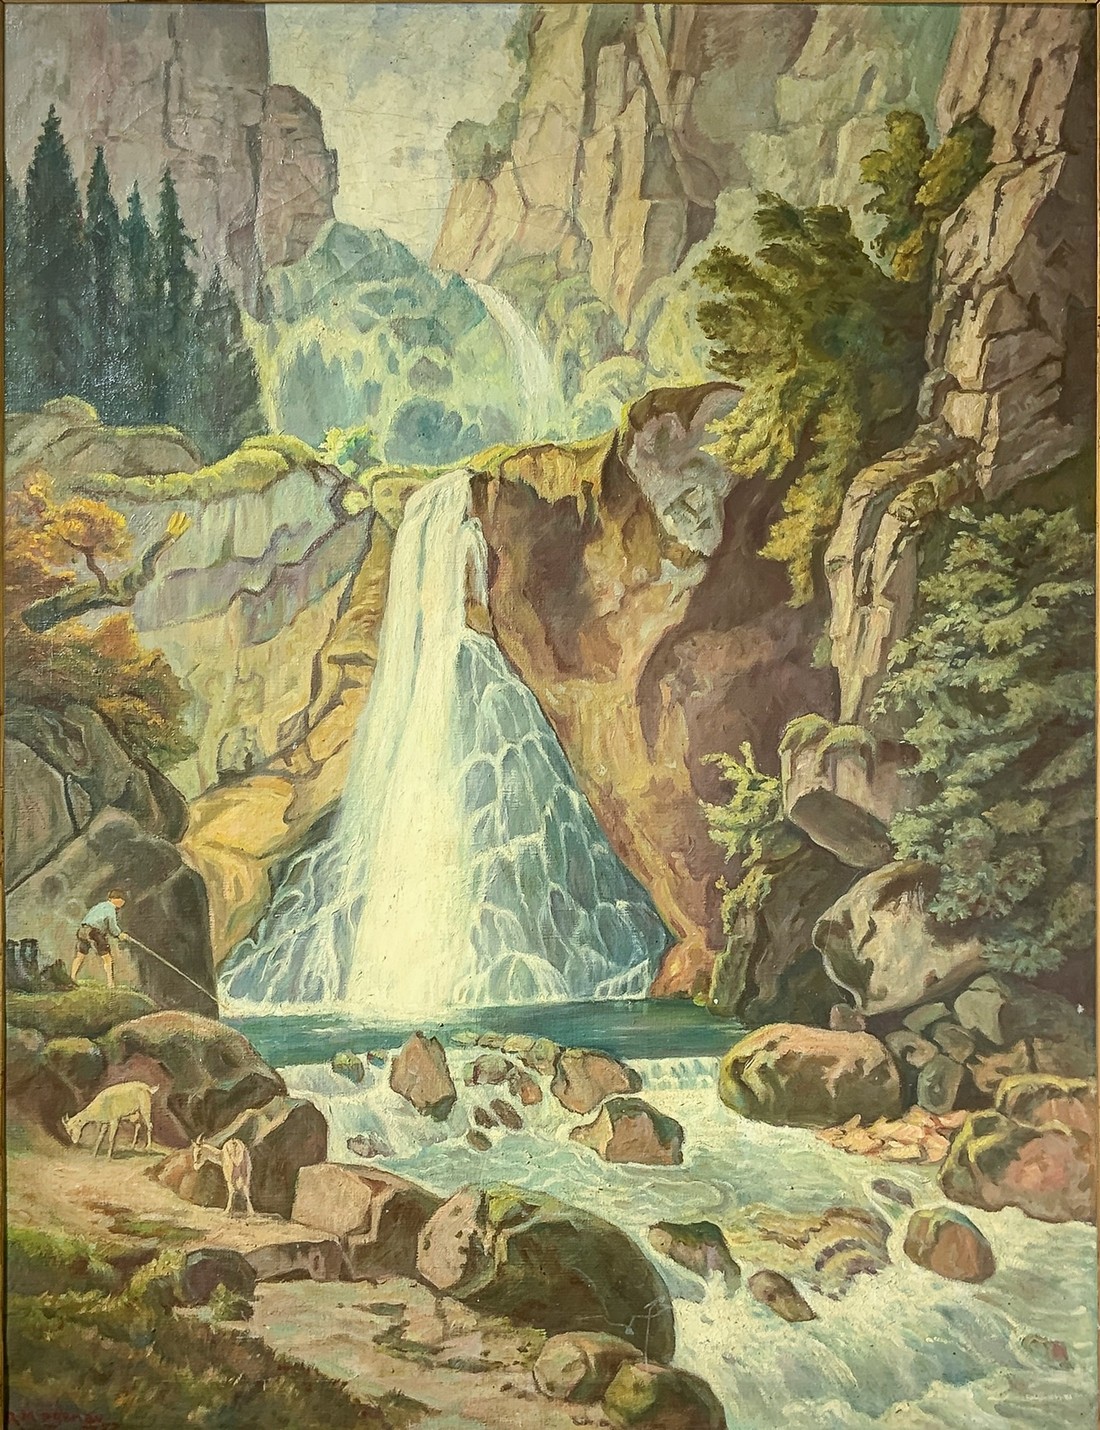 Oil paintinging on canvas depicting the river with waterfall, signed on the lower left corner R. Mag